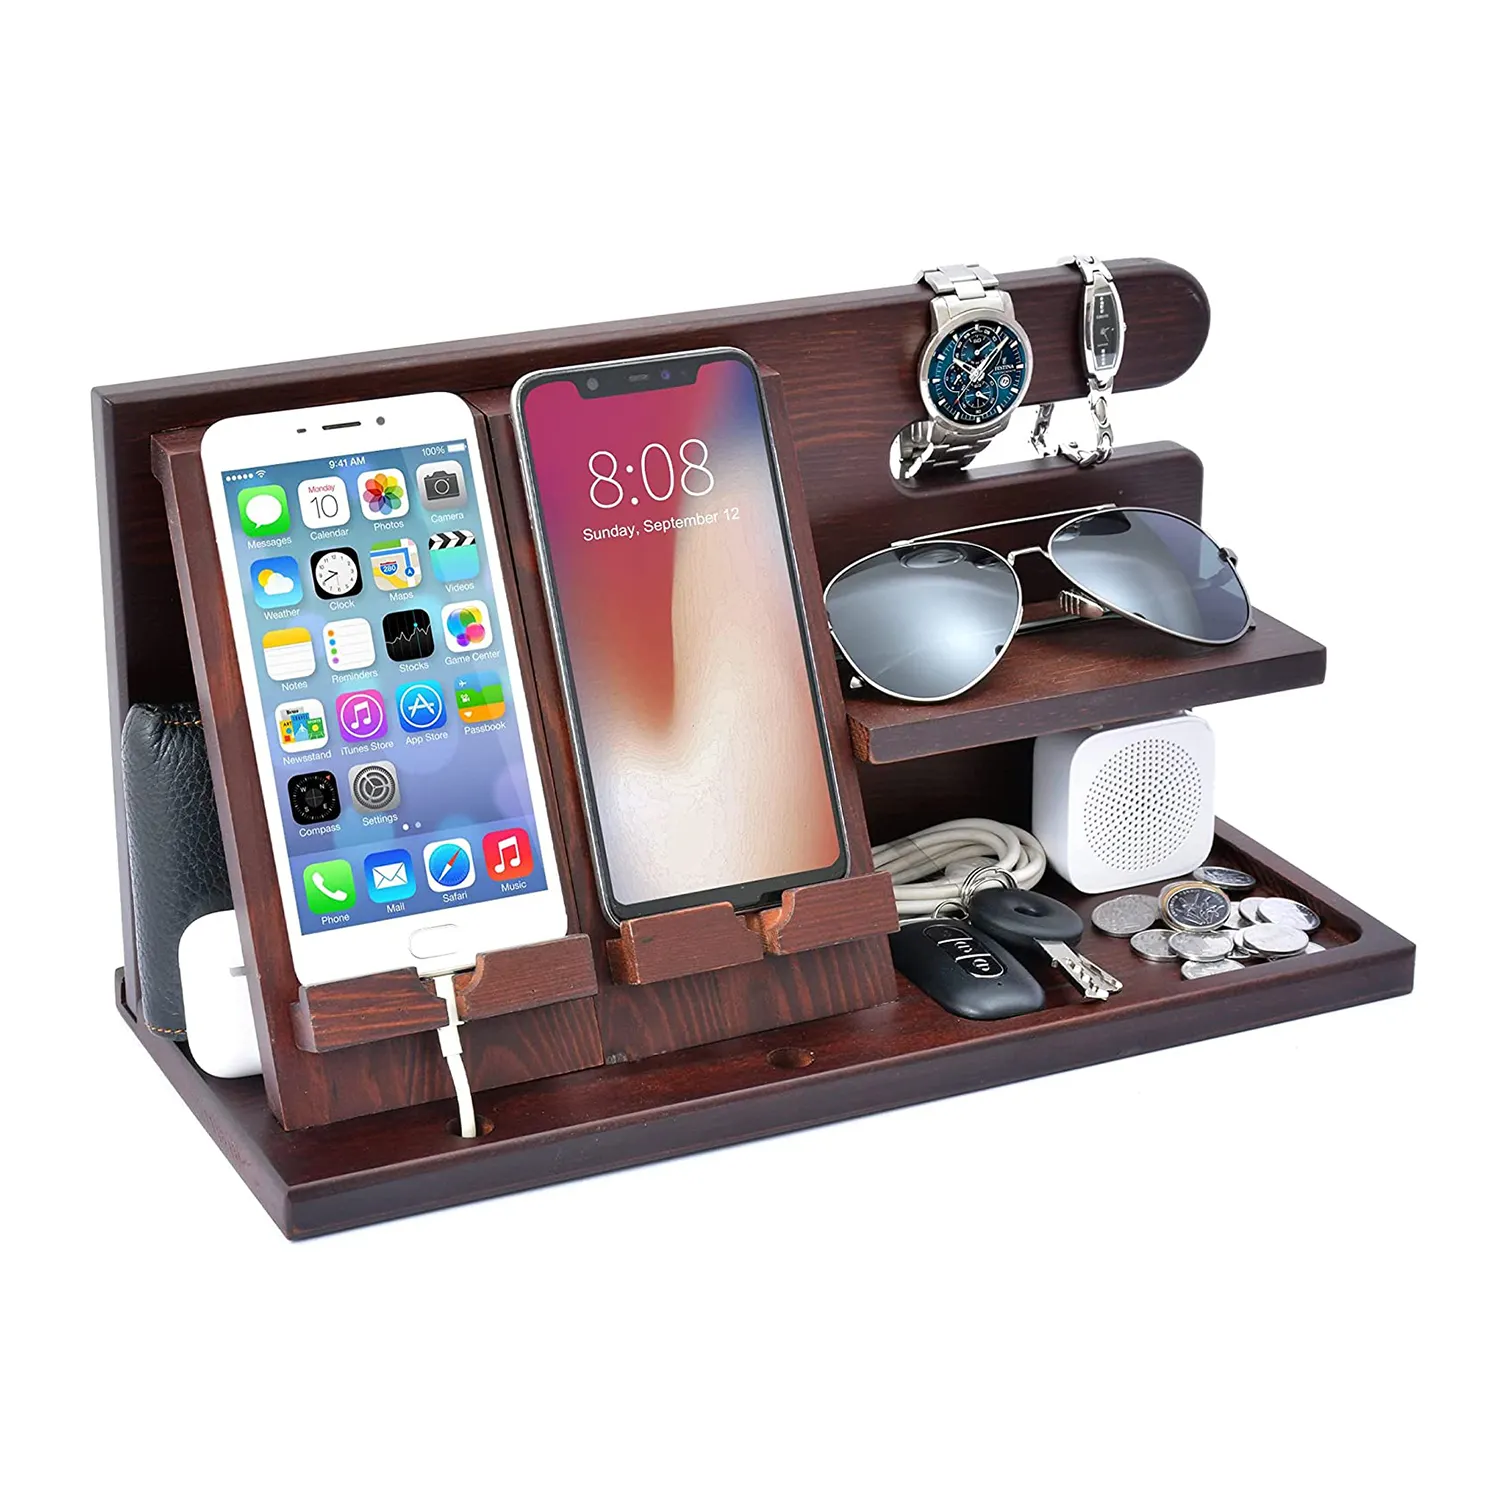 Wood Phone Docking Station for Men Wooden Cell Phone Holder Wallet Watch Stand Organizer